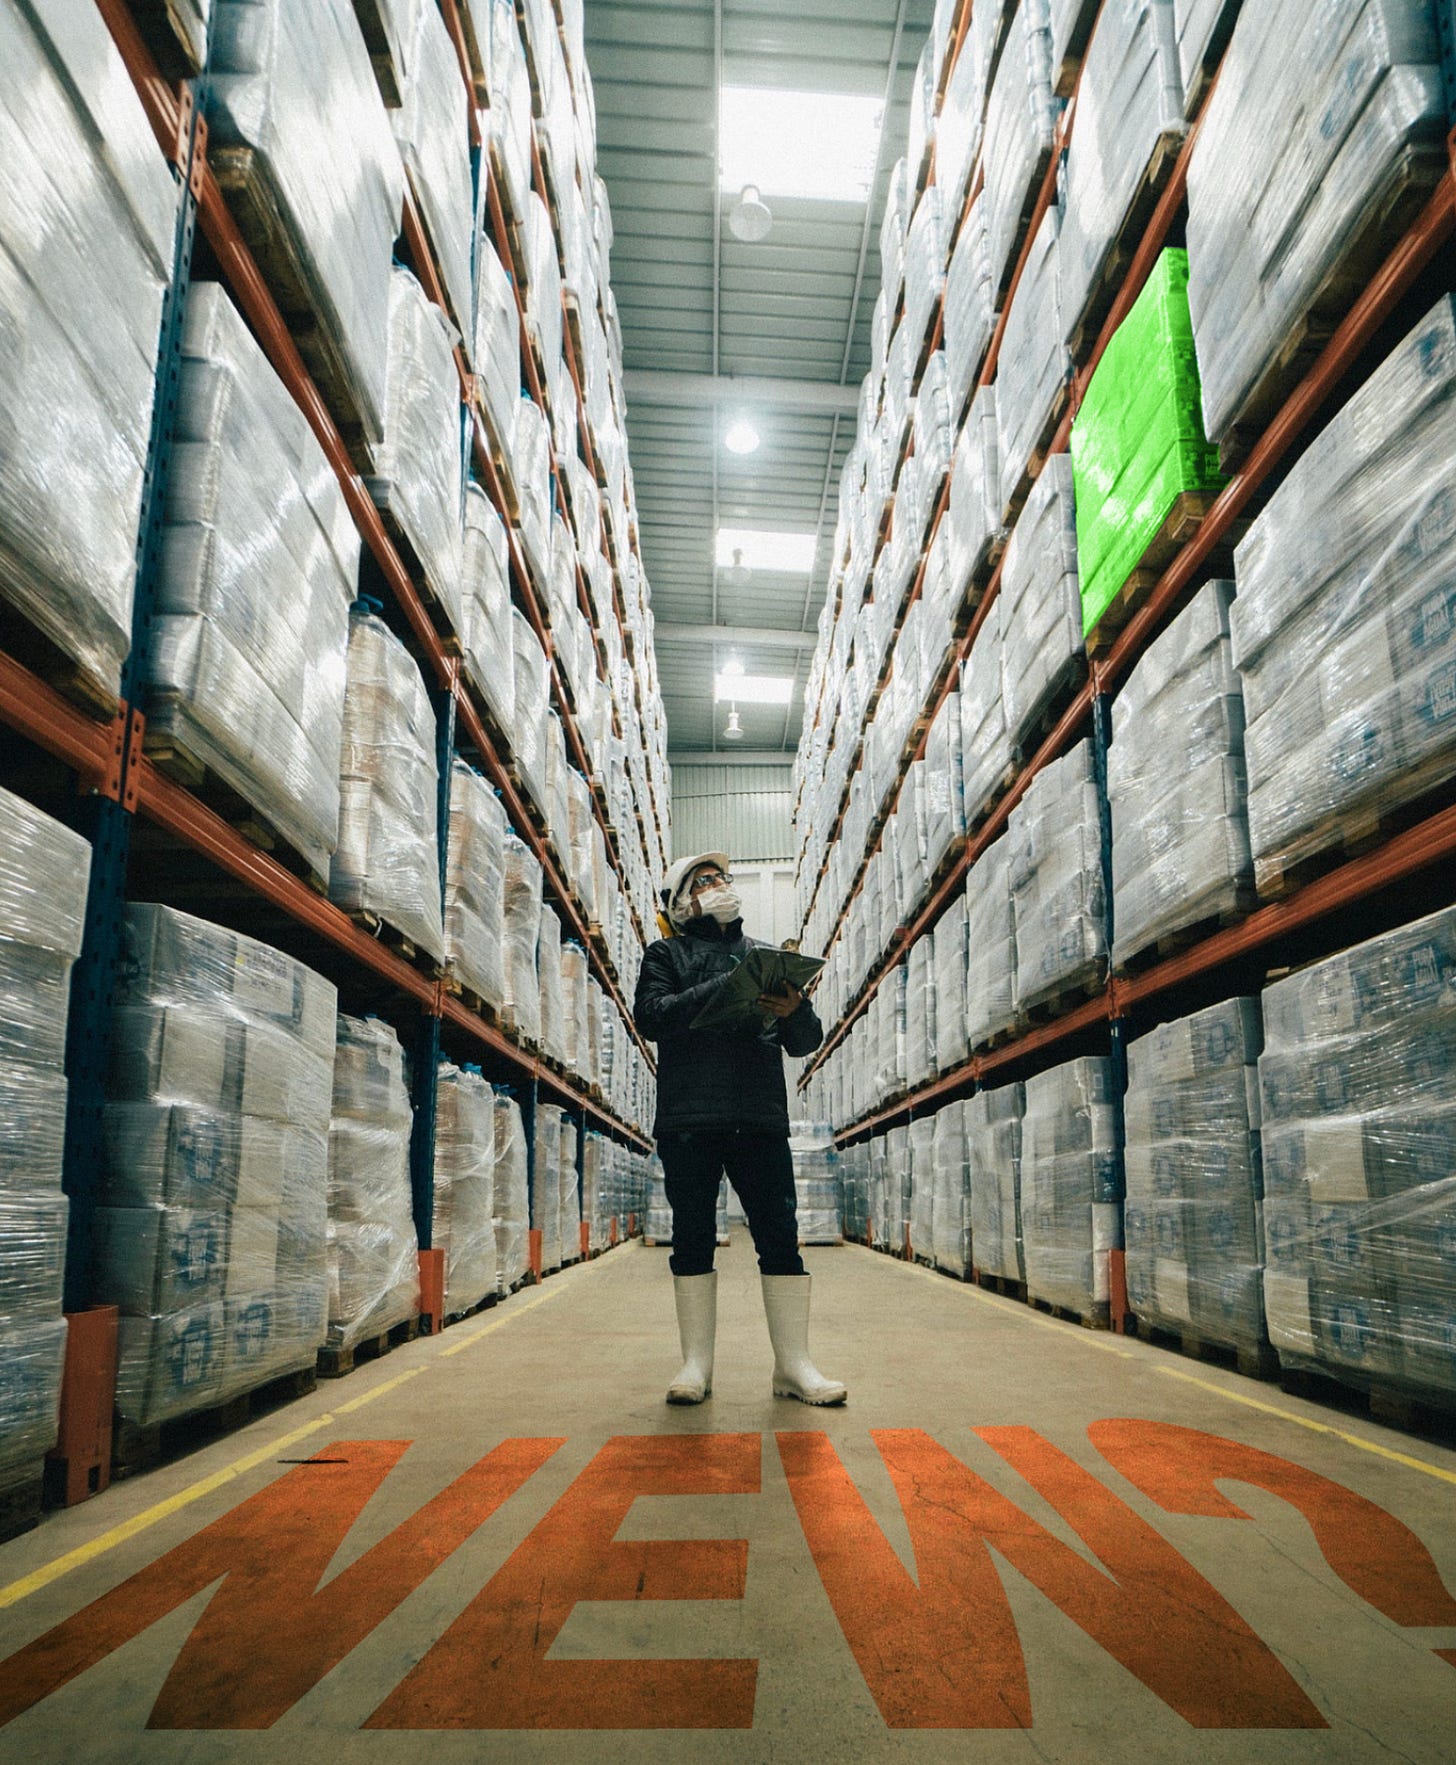 A photograph of a person dressed in protective clothing and holding a clipboard, standing in a warehouse. There are extremely tall metal shelves on either side of them, full of pallet loads of plastic wrapped items. The pallet the person appears to be looking up at is green, while every other item on the shelves is white.